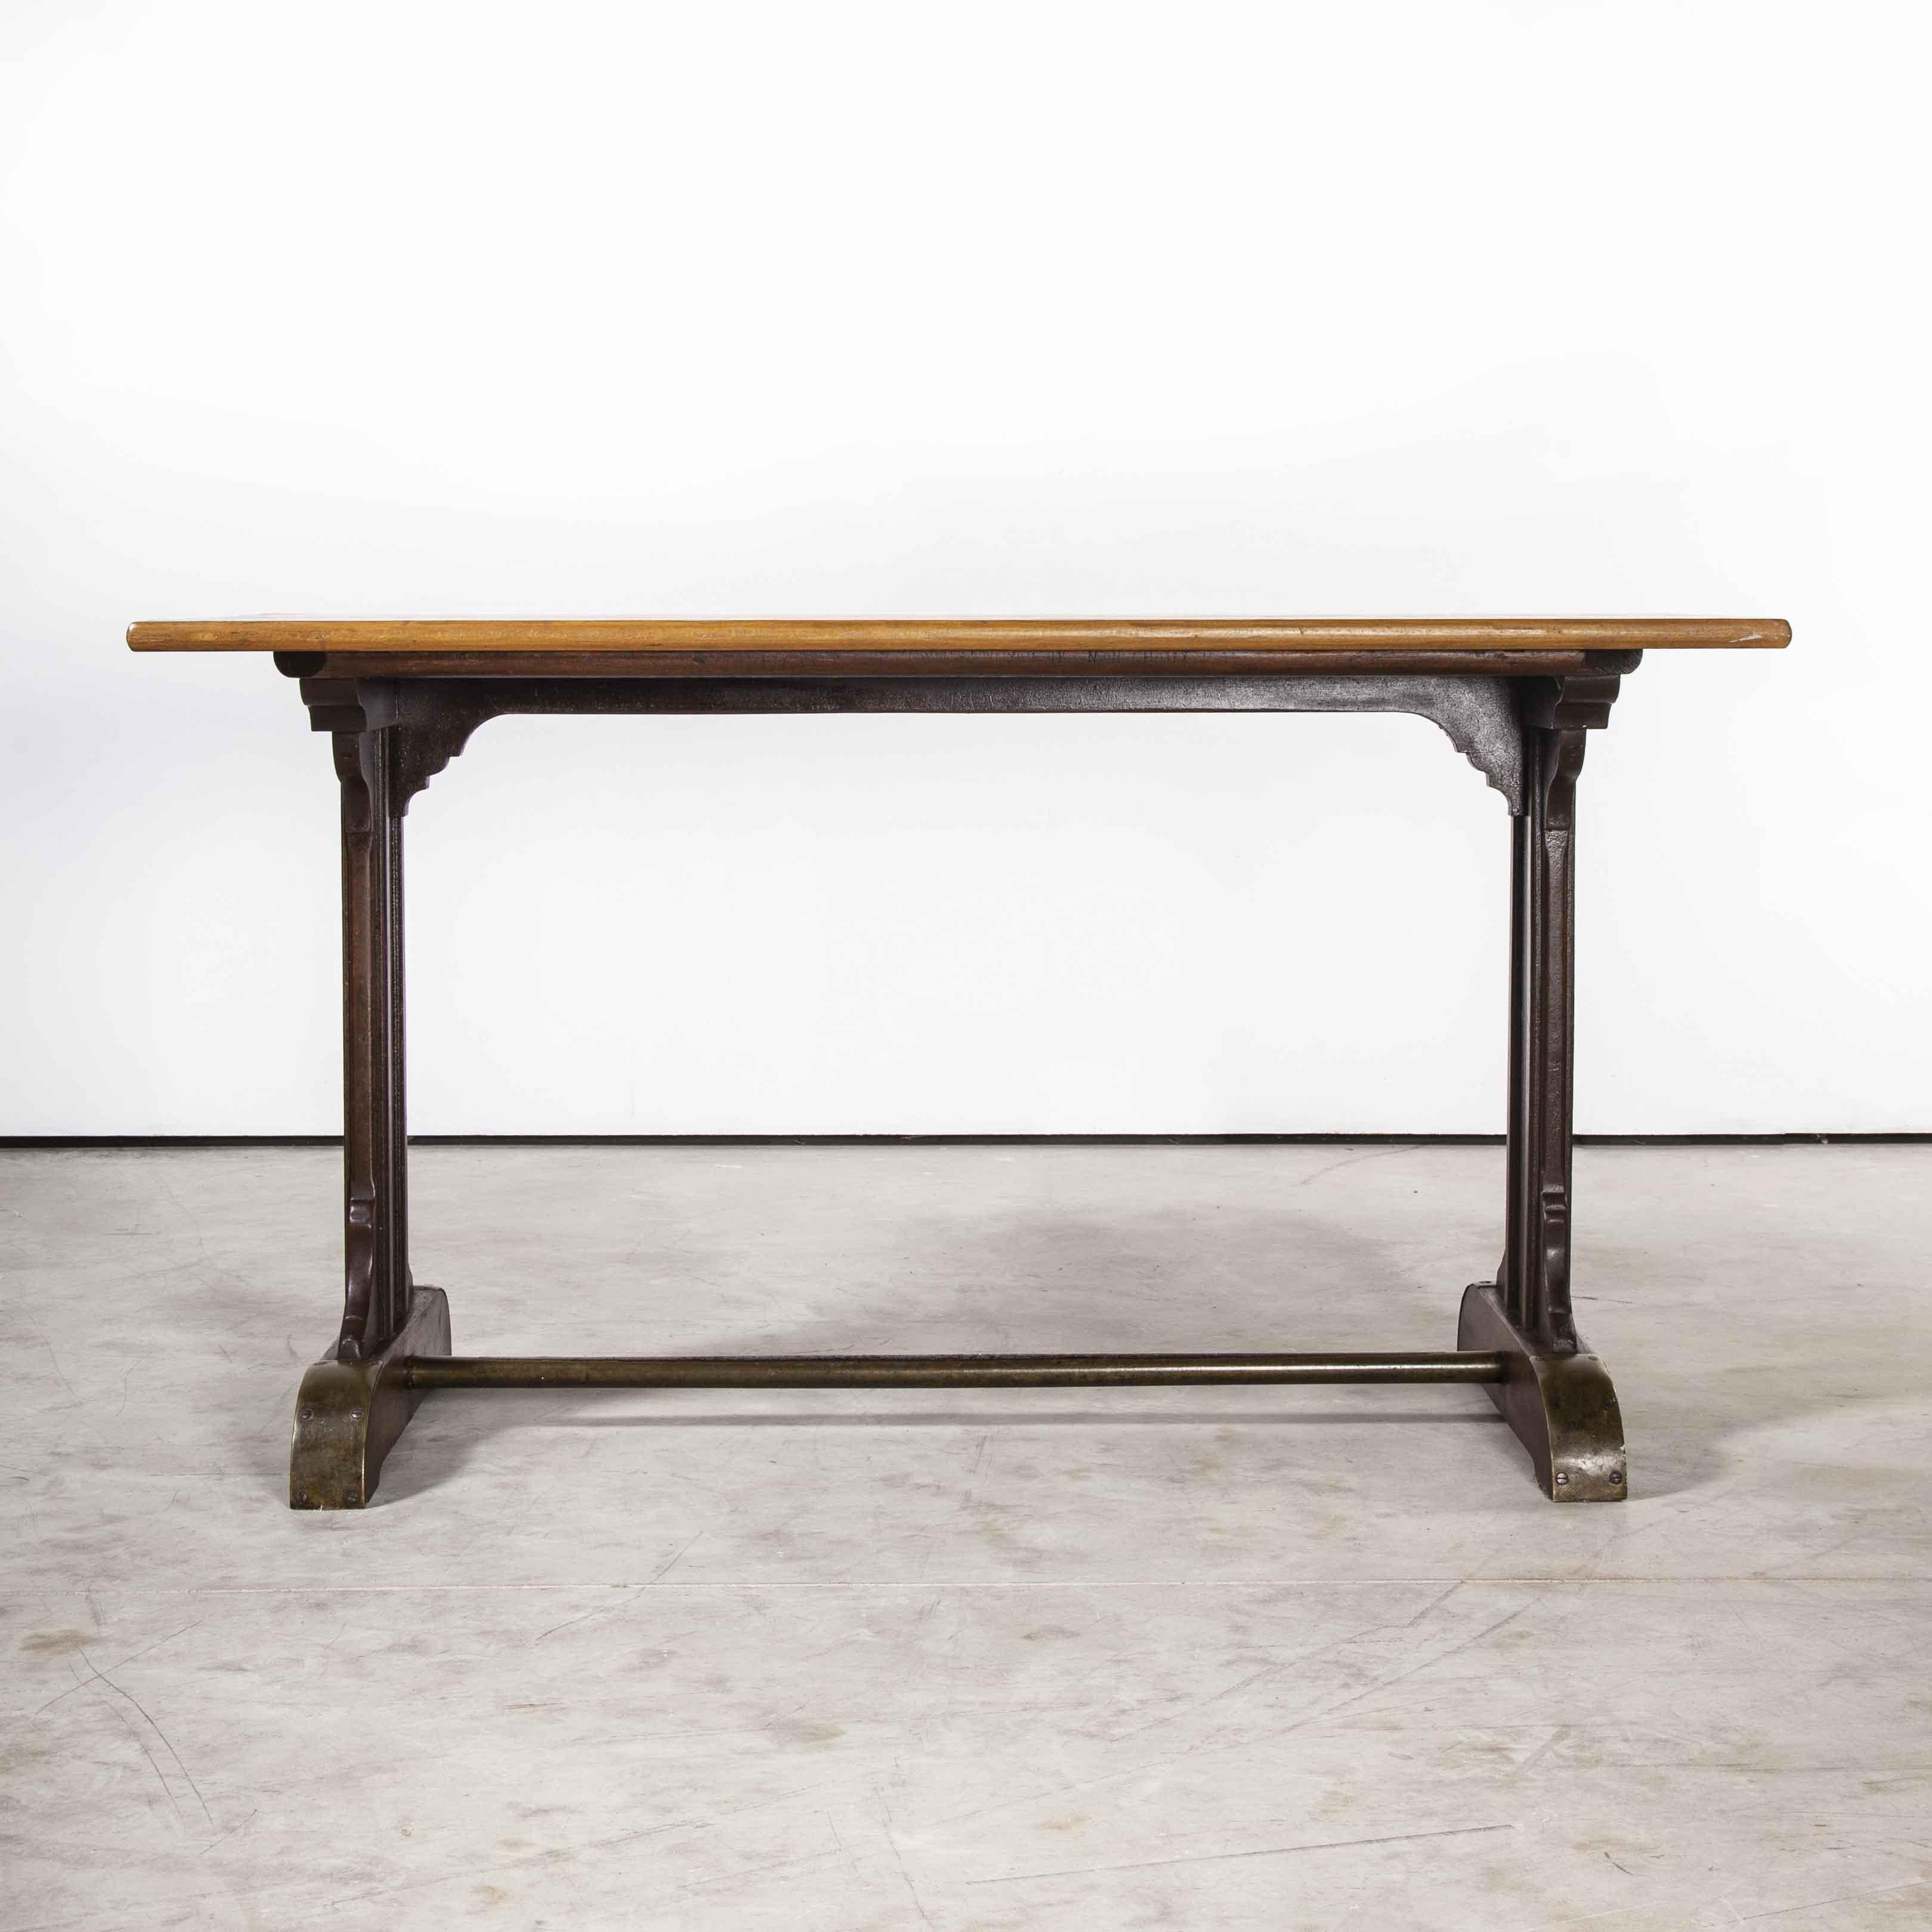 1930's Original French Café Table, Rectangular Dining Table 'Model 1114.2' For Sale 7